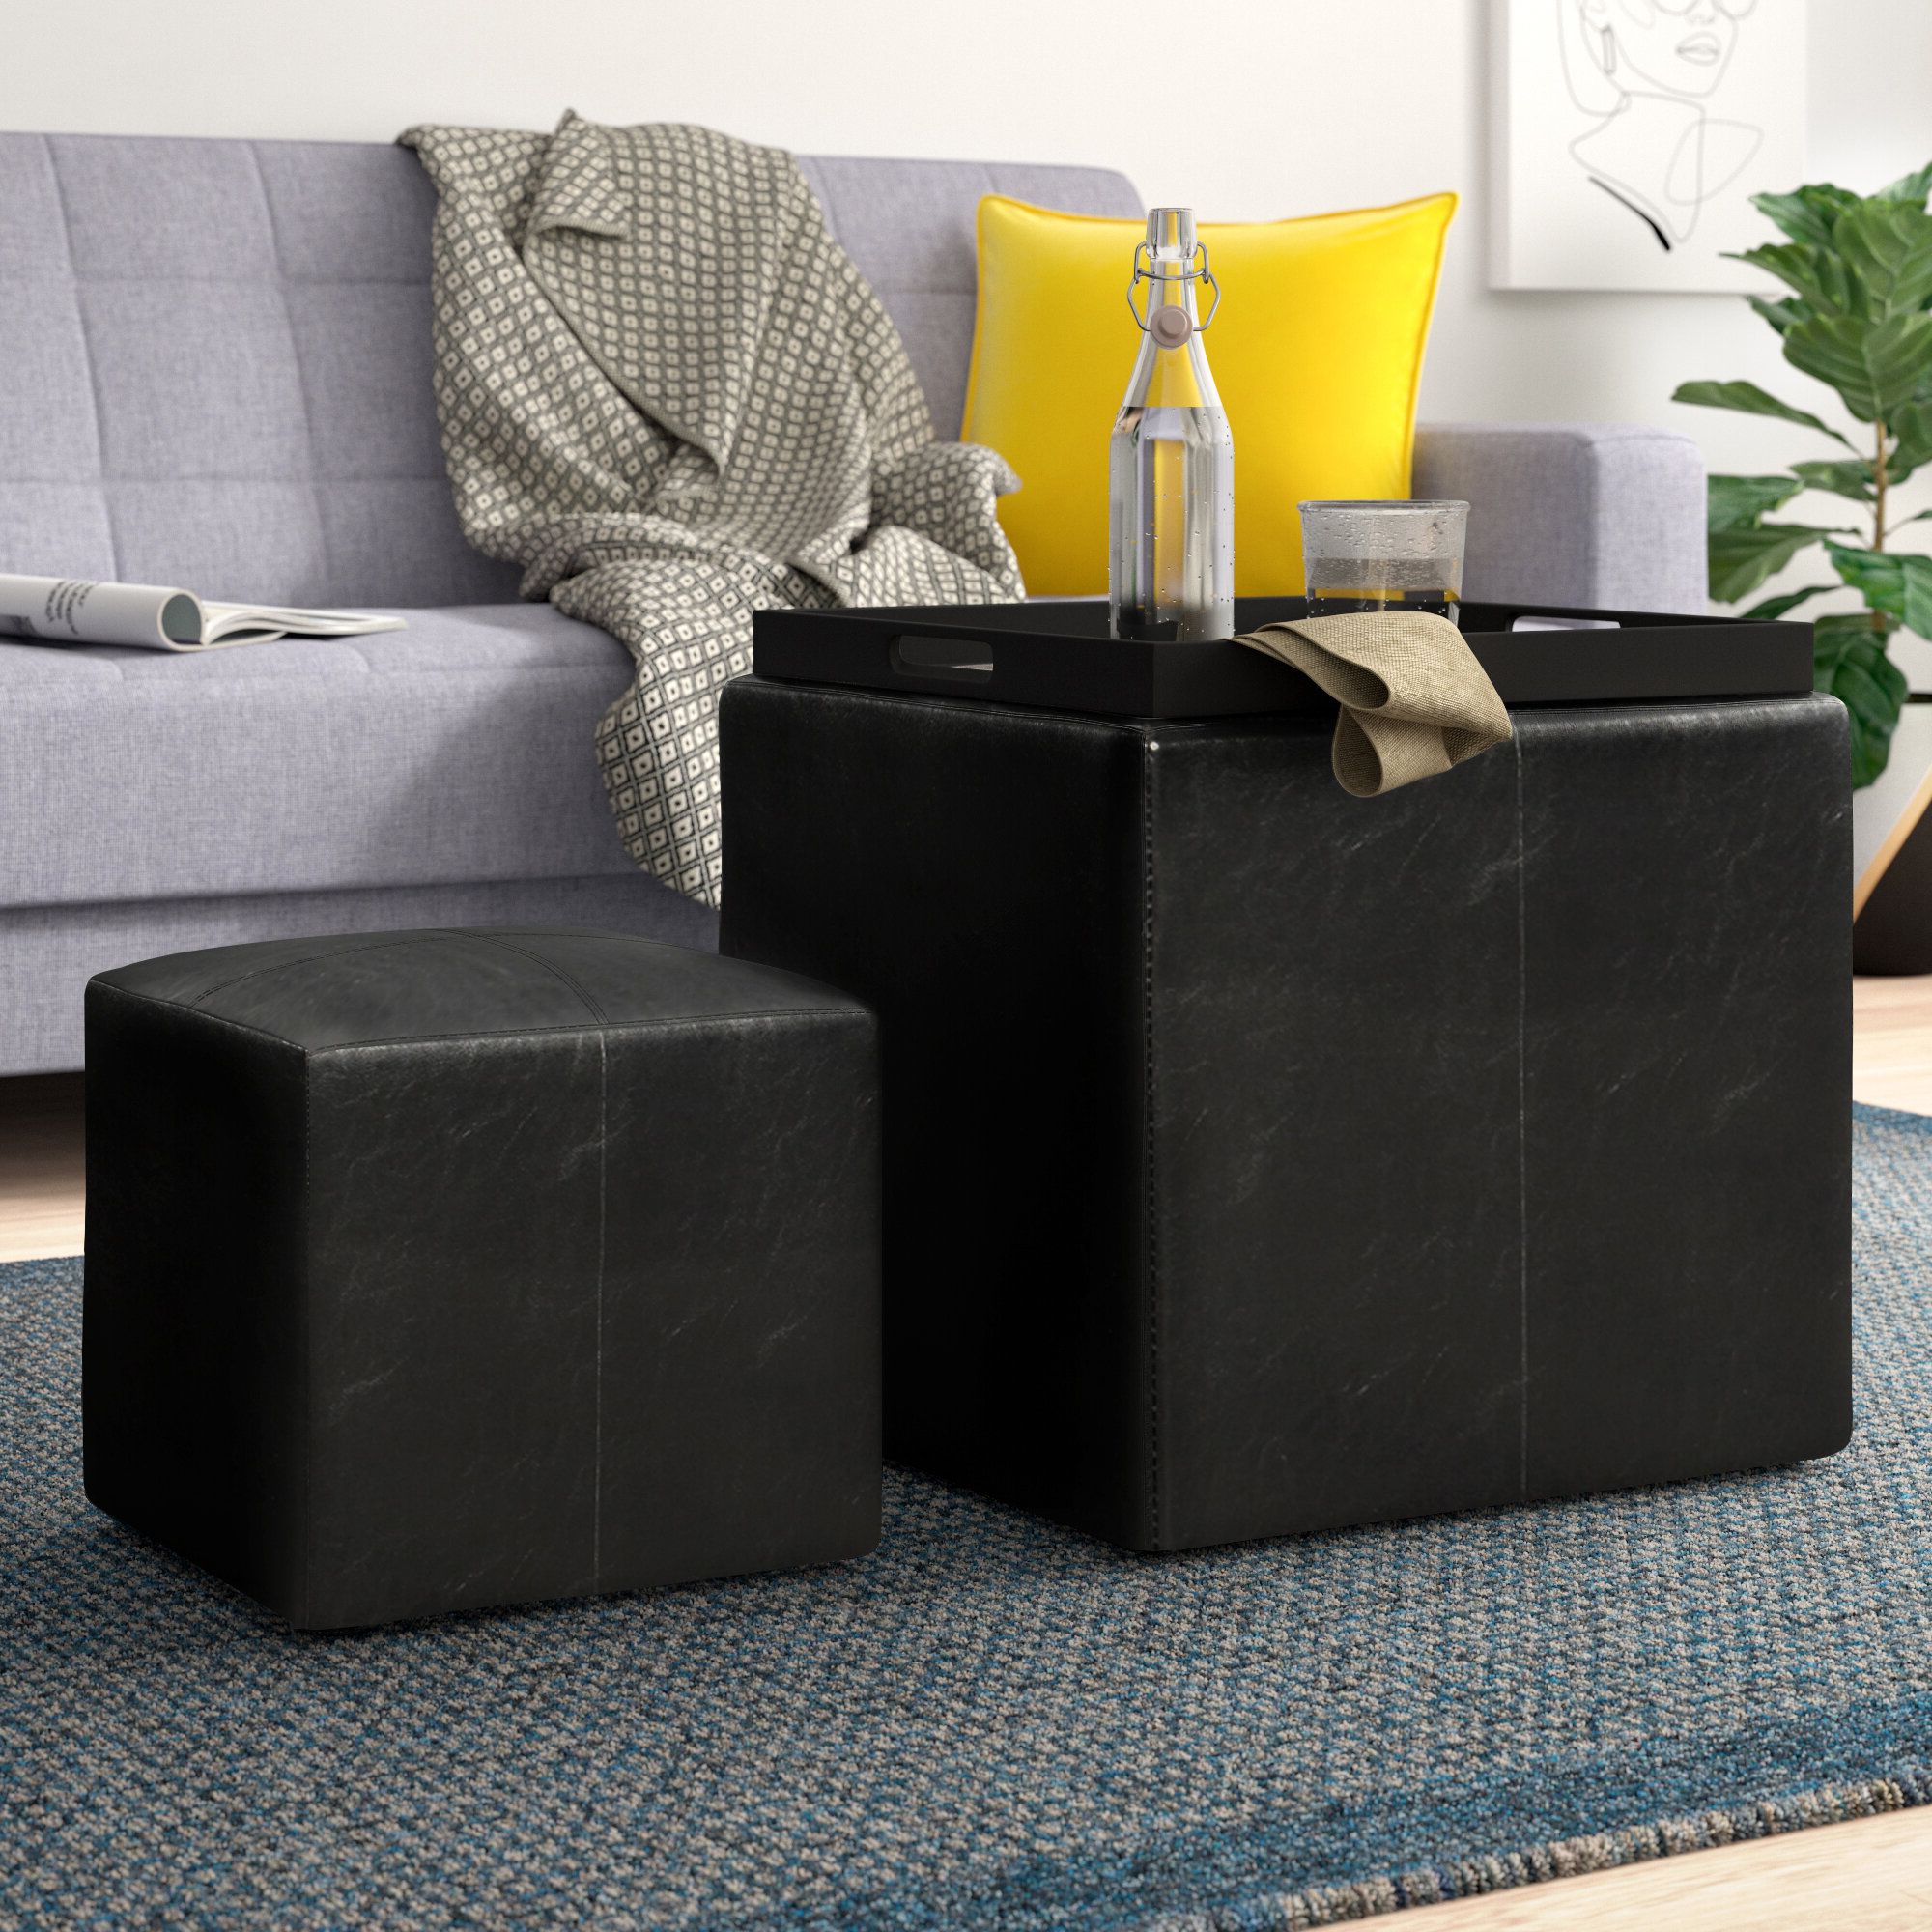 Storage Ottomans With Reversible Trays Intended For 2019 Zipcode Design™ Marla Square Ottoman With Stool And Reversible Tray &  Reviews (View 5 of 15)